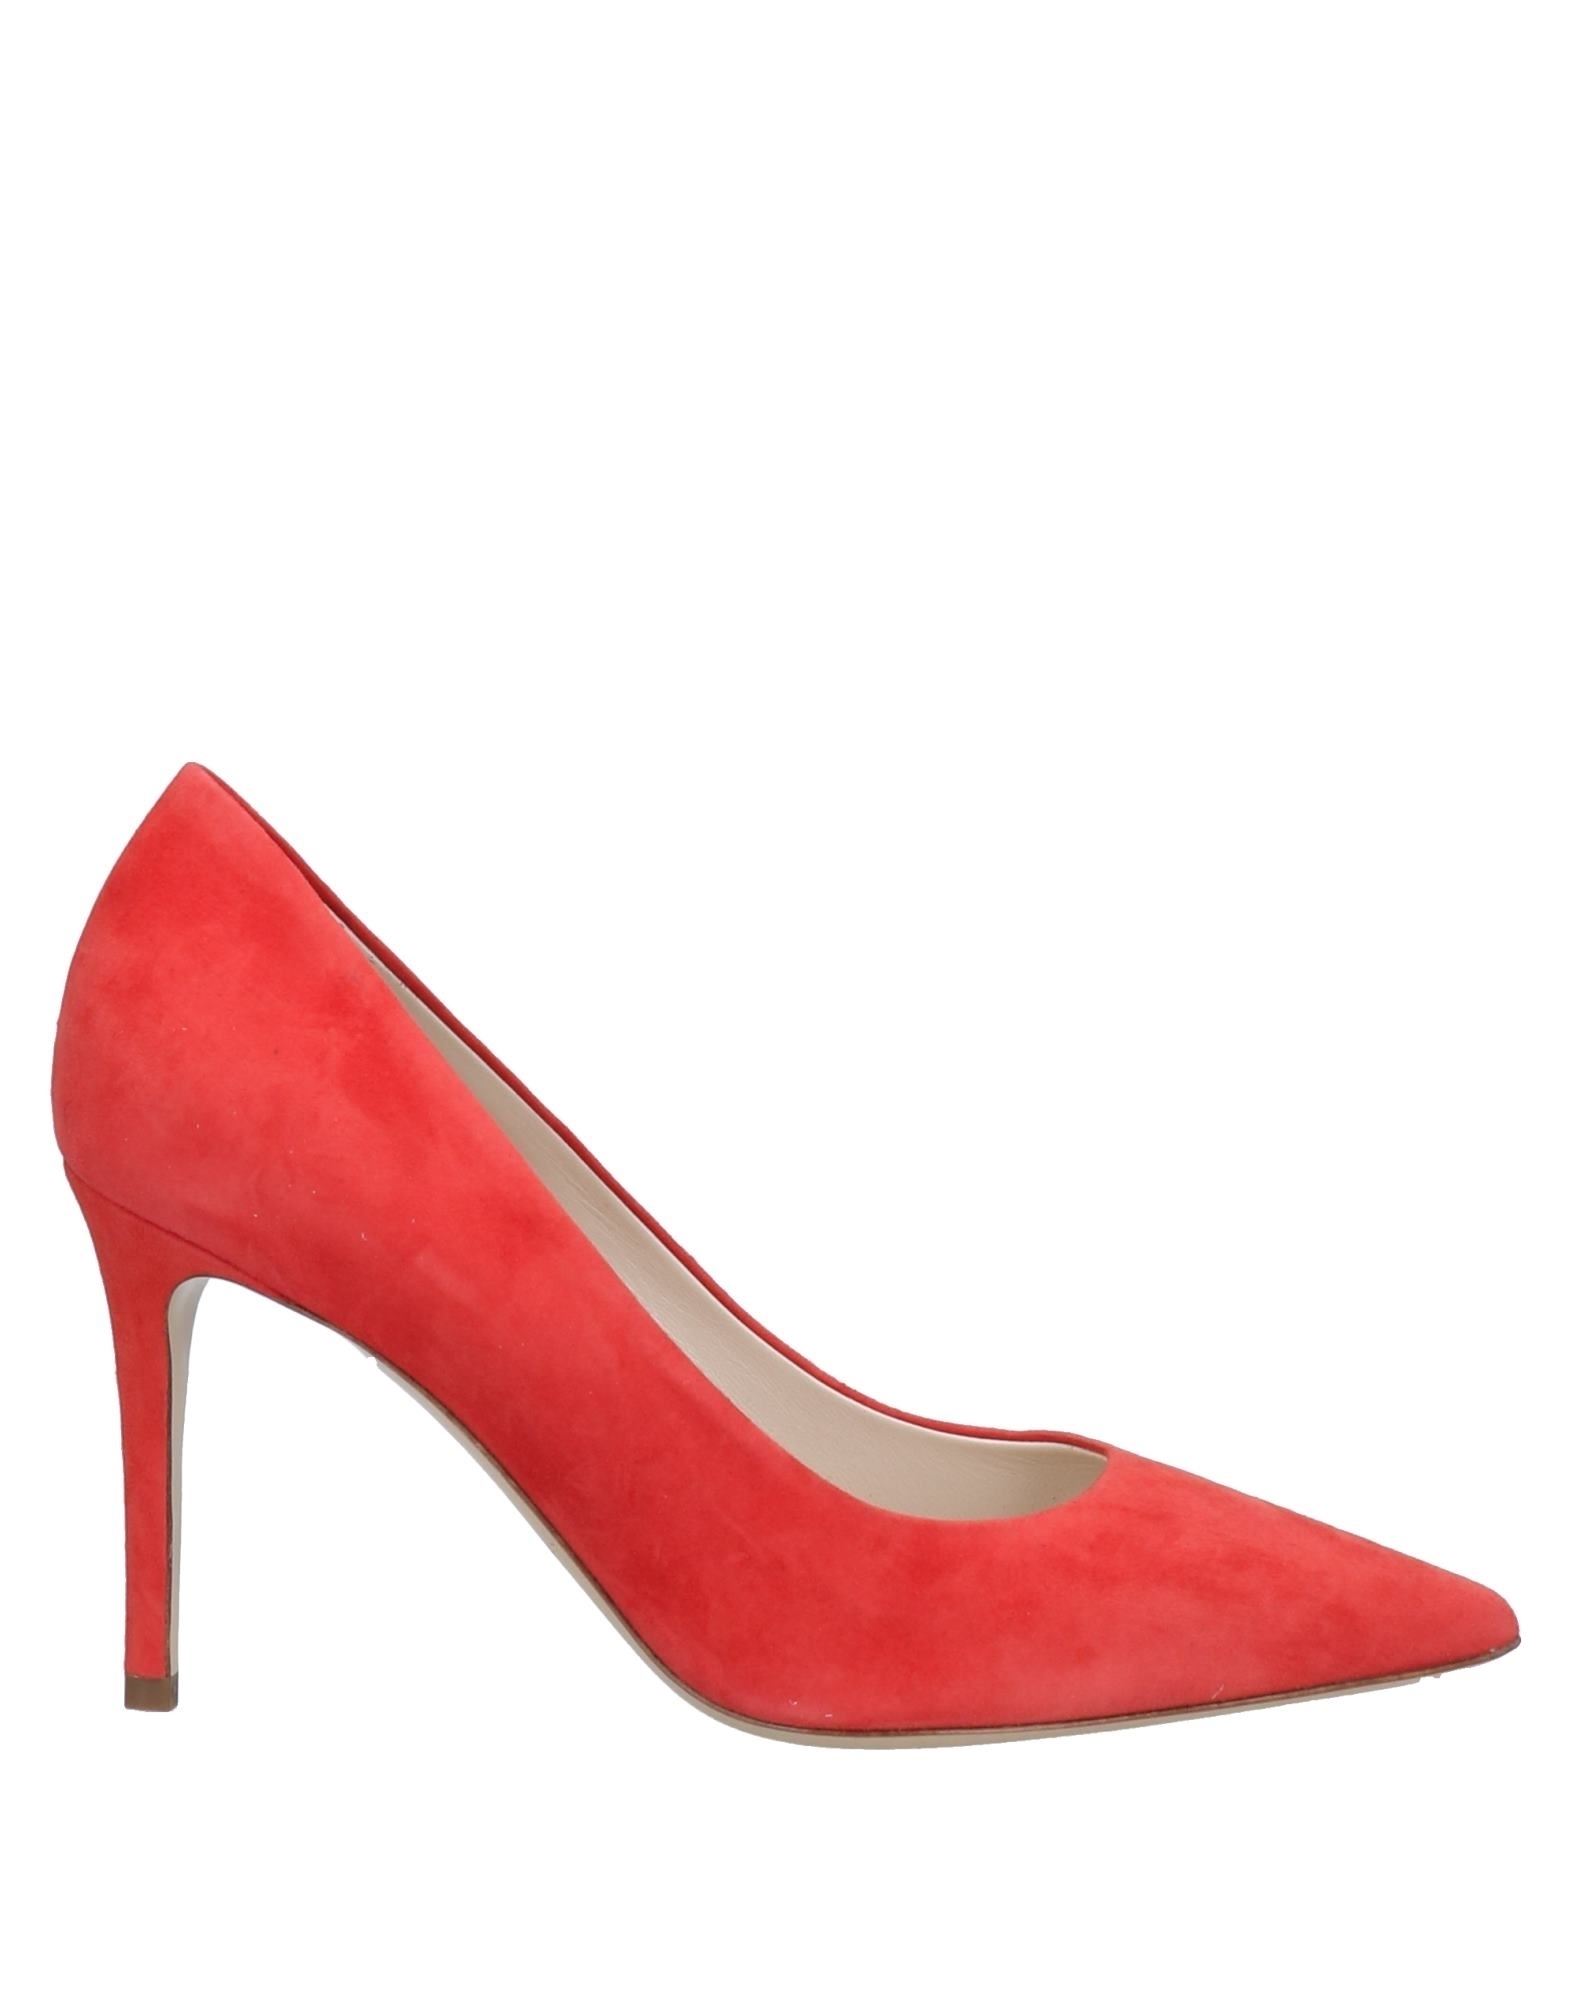 Deimille Pumps In Coral